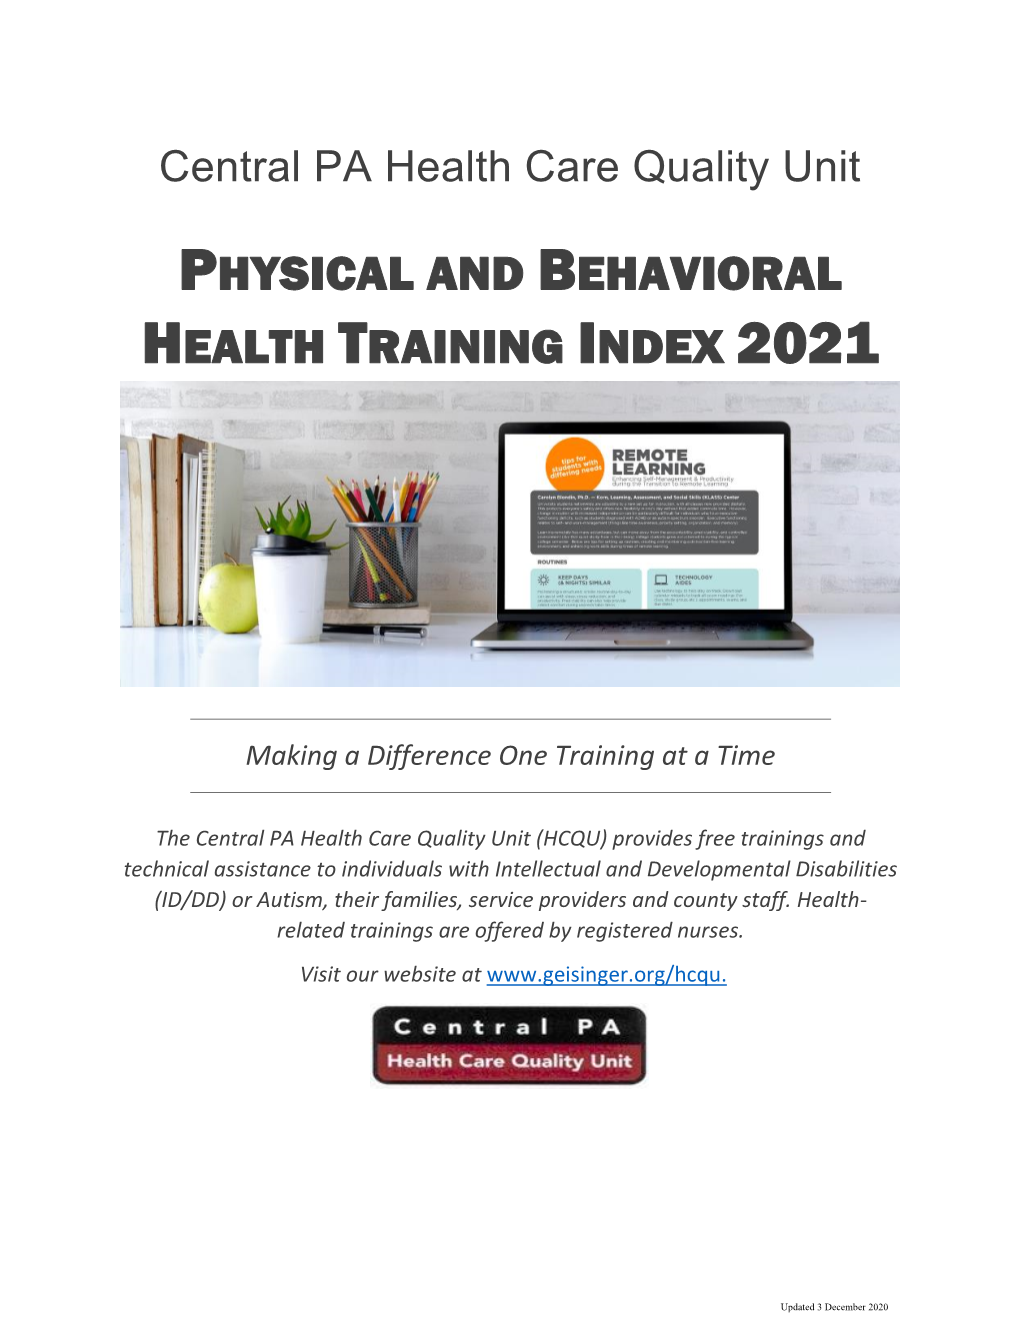 Physical and Behavioral Health Training Index 2021